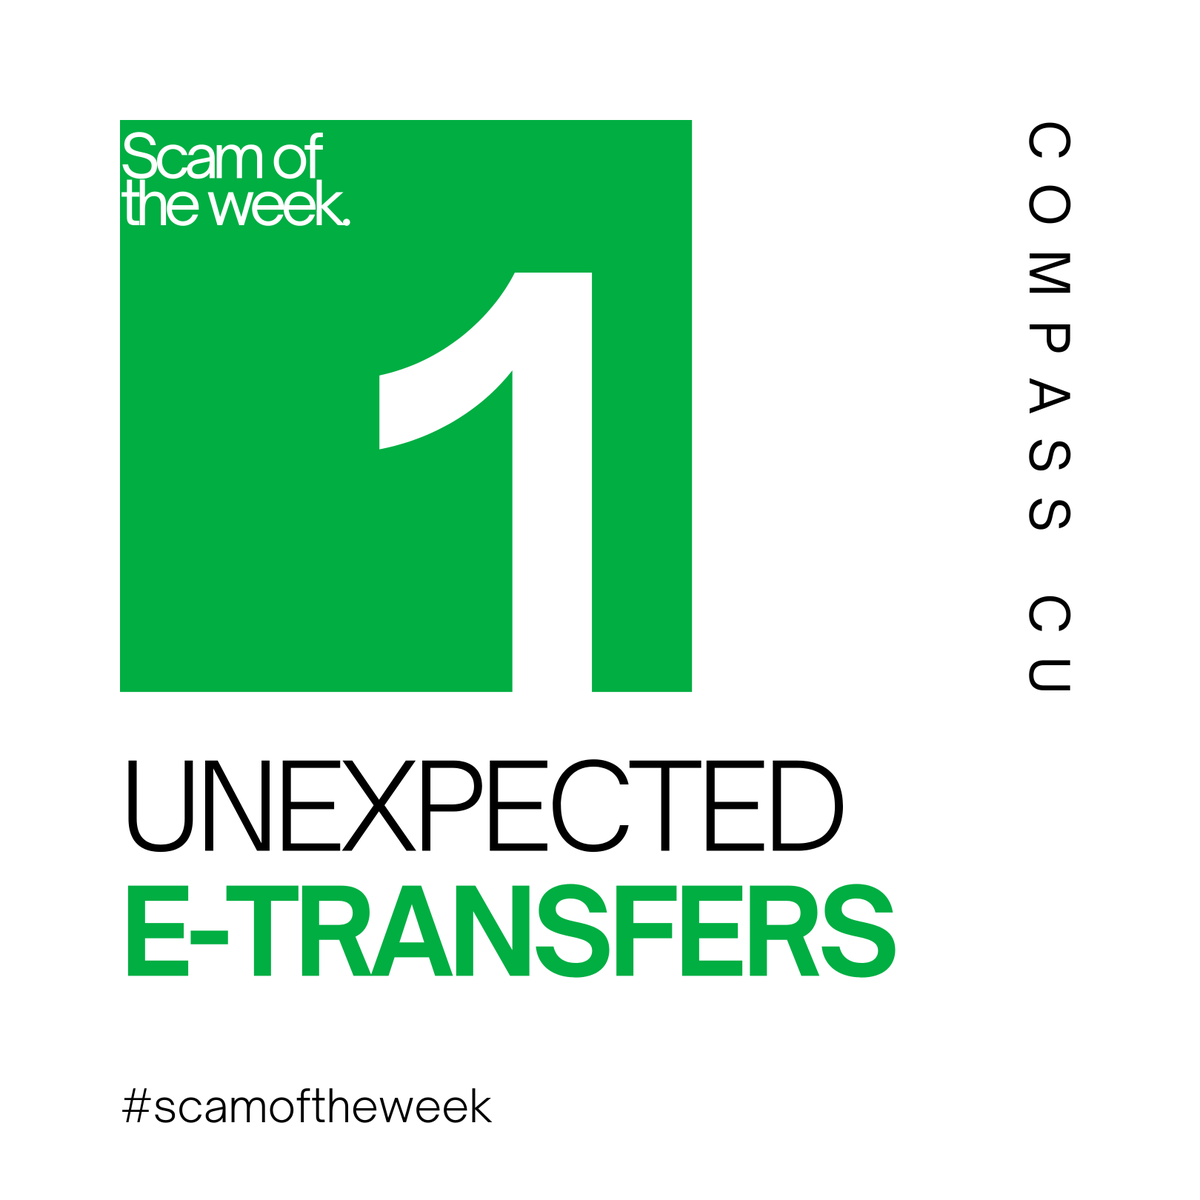 #1 Unexpected e-Transfers.

Unexpected e-Transfer scams have become a common form of fraud. Scammers will often send an email or message claiming you have received an unexpected e-Transfer payment, usually for a large or suspicious amount. 

#scamoftheweek #fraudprevention